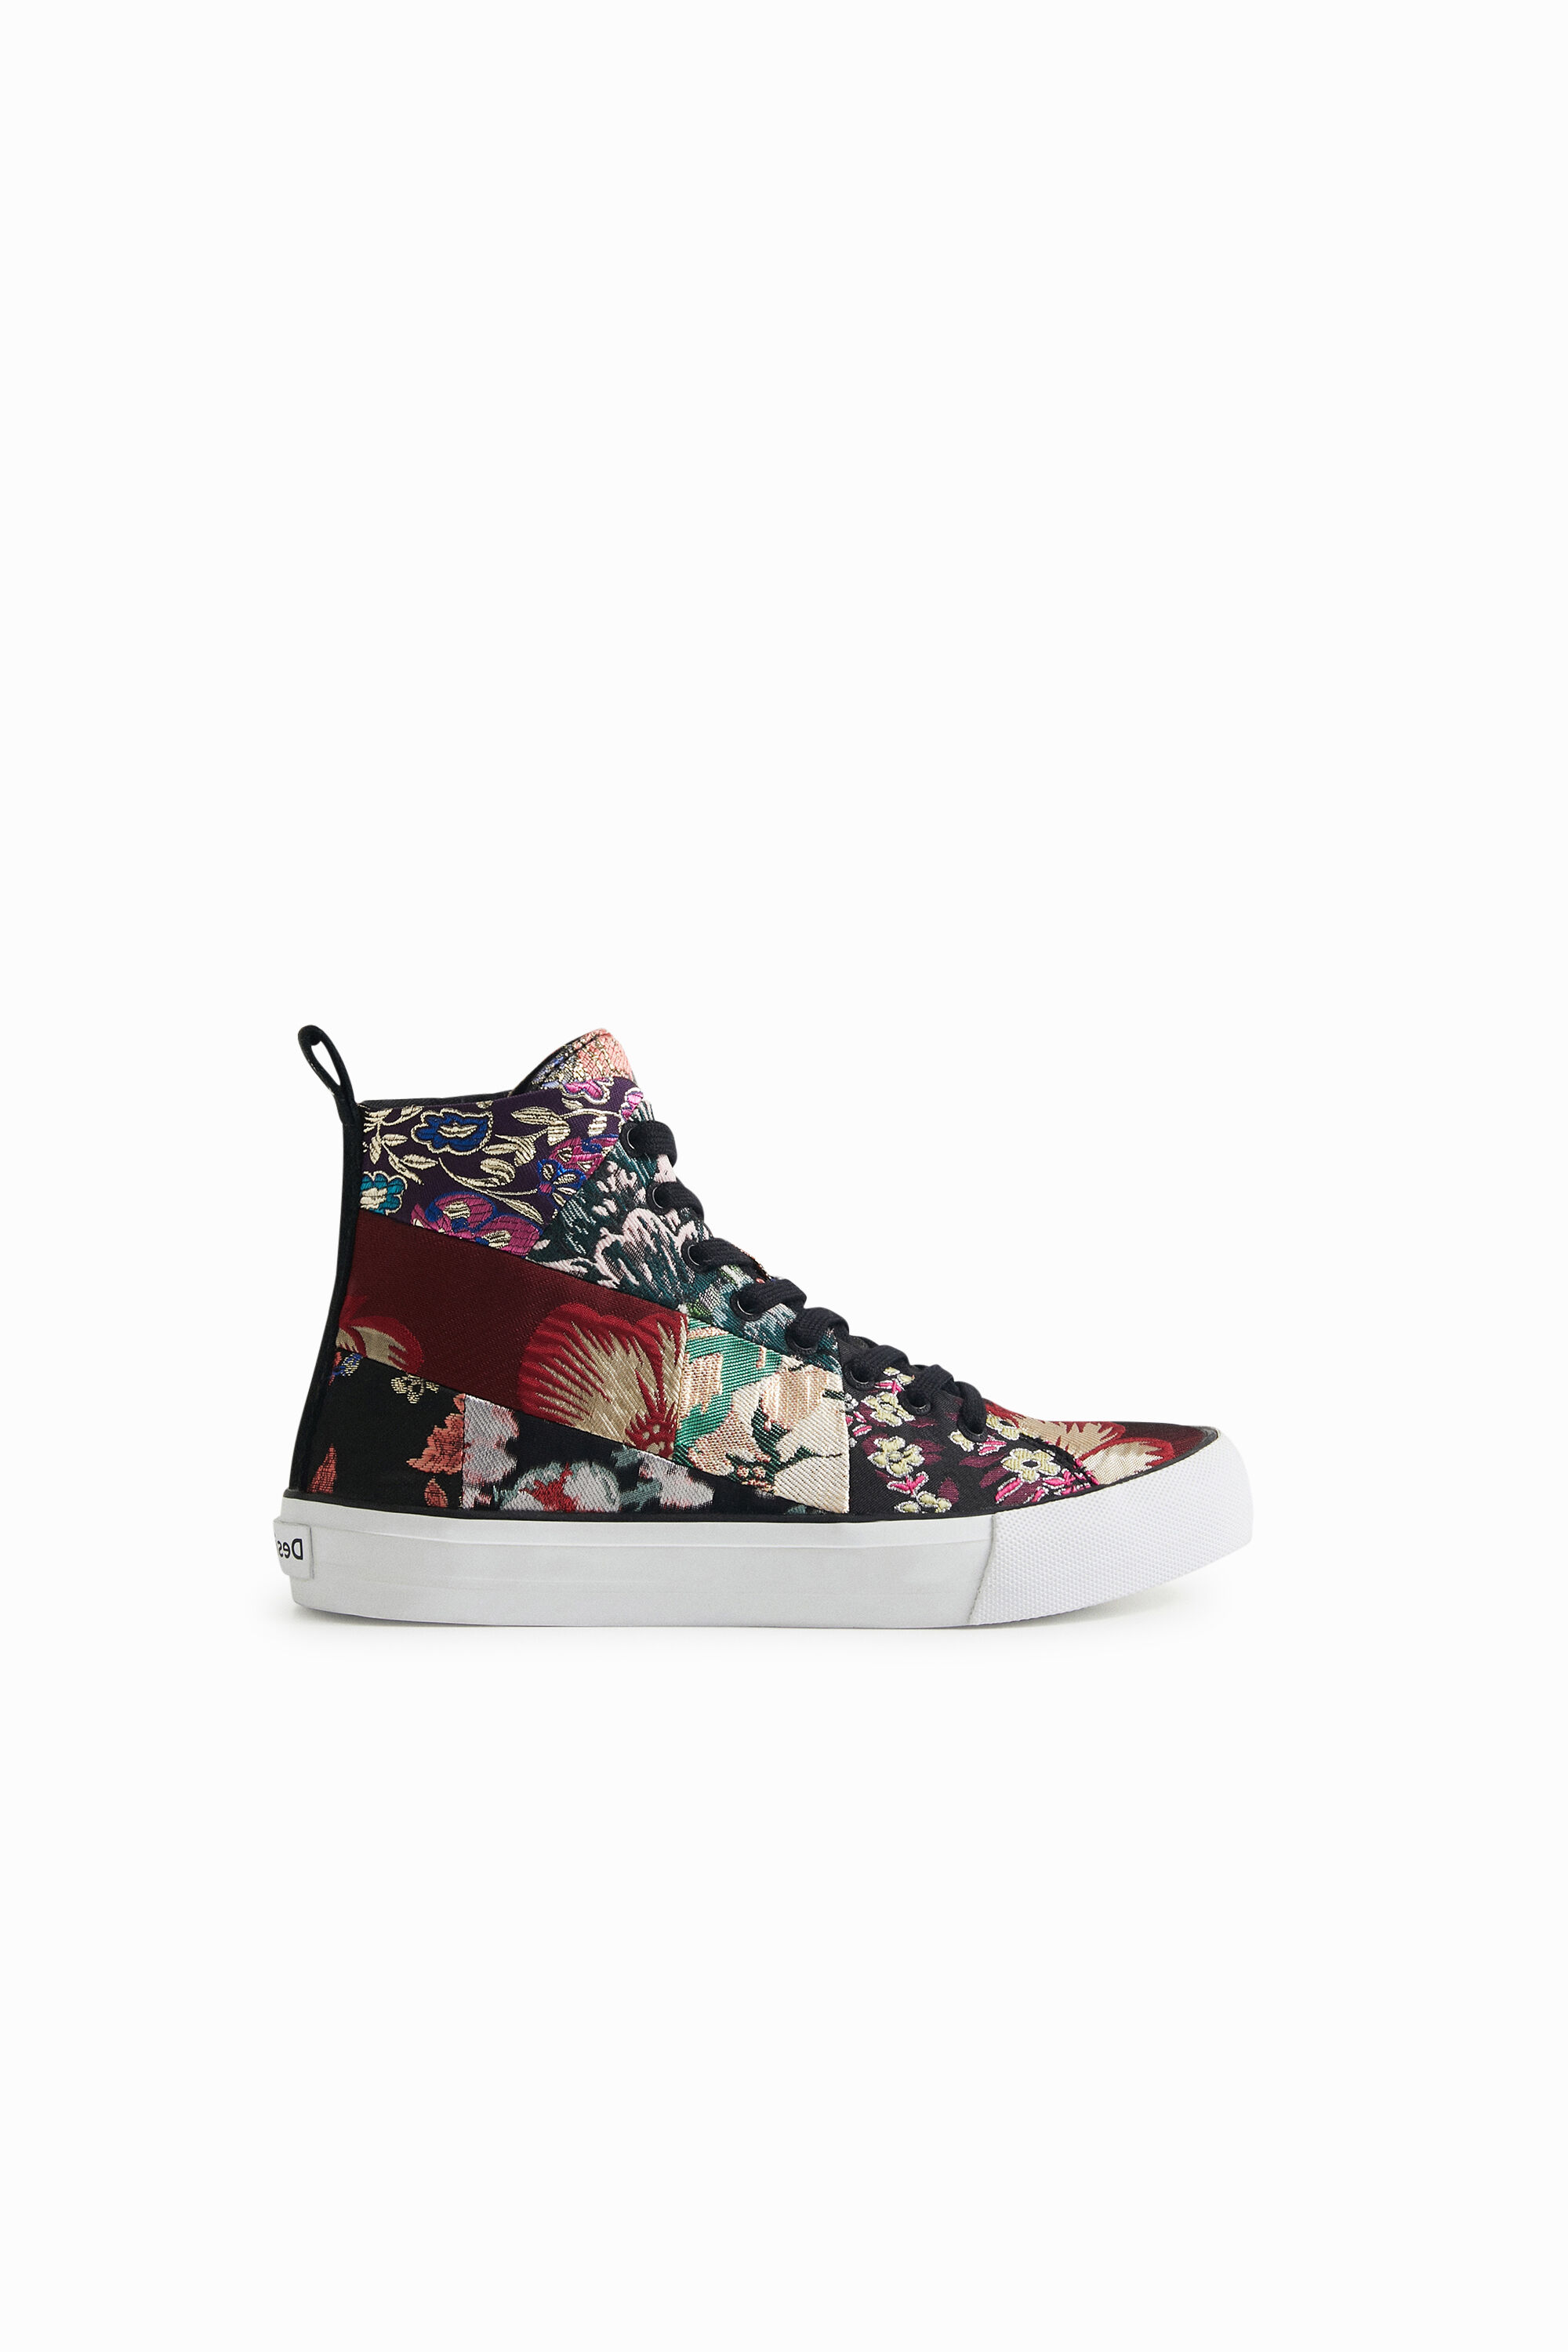 Desigual High-top Sneakers Floral Patch In Material Finishes